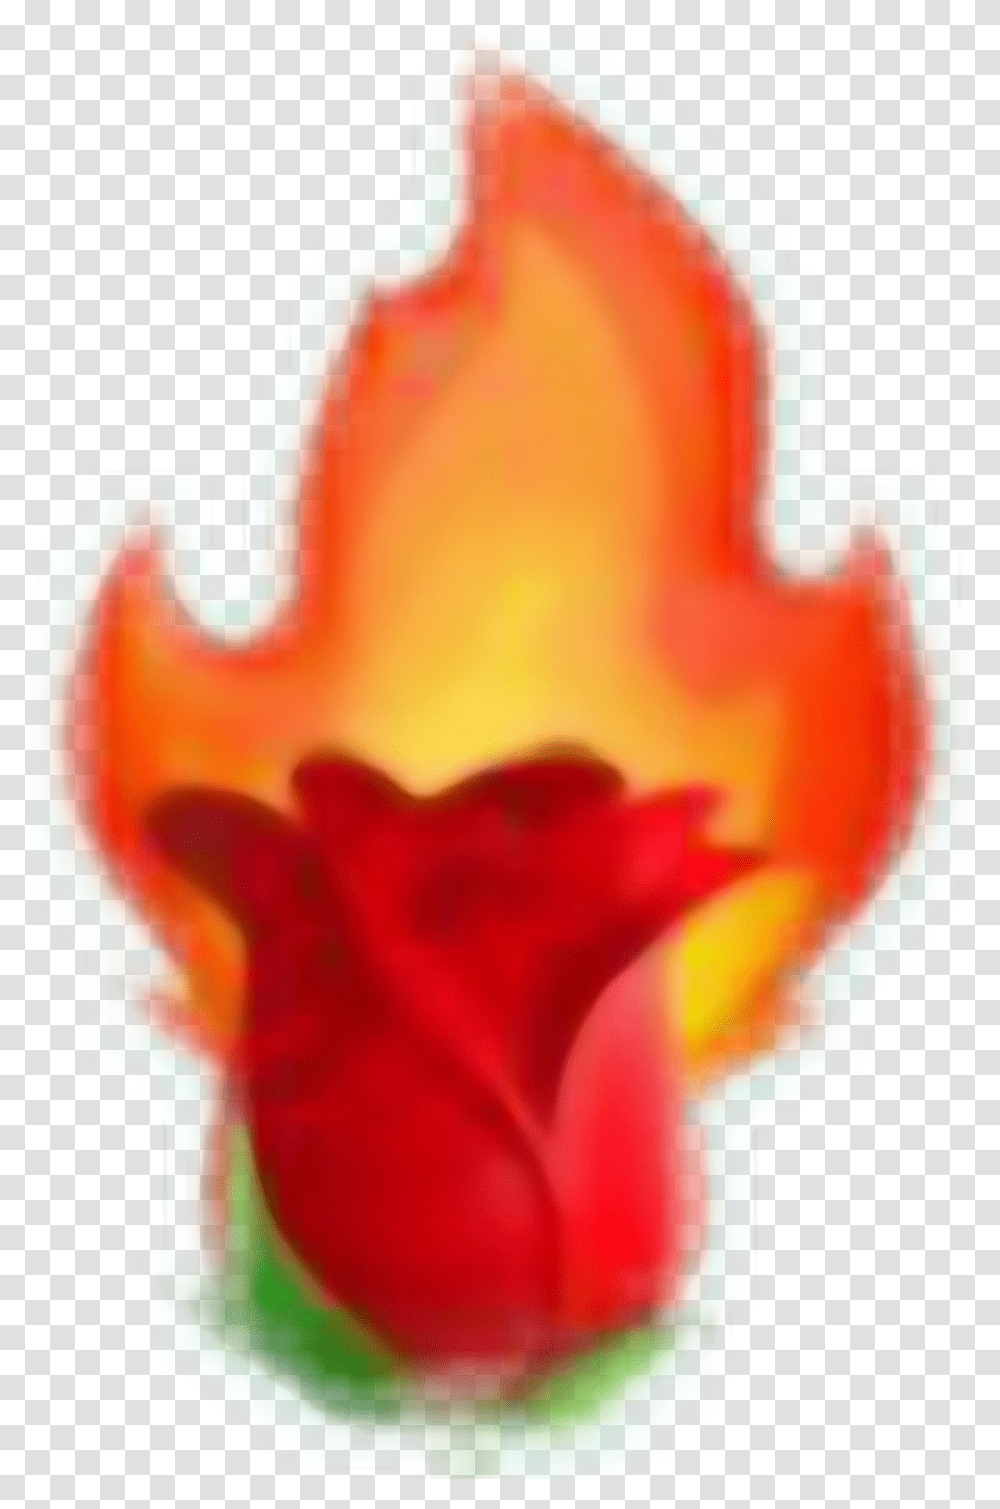 Rose Fire Tumblr Aesthetic Aestheticred Red Emojis Tulip, Flower, Plant, Blossom, Flame Transparent Png